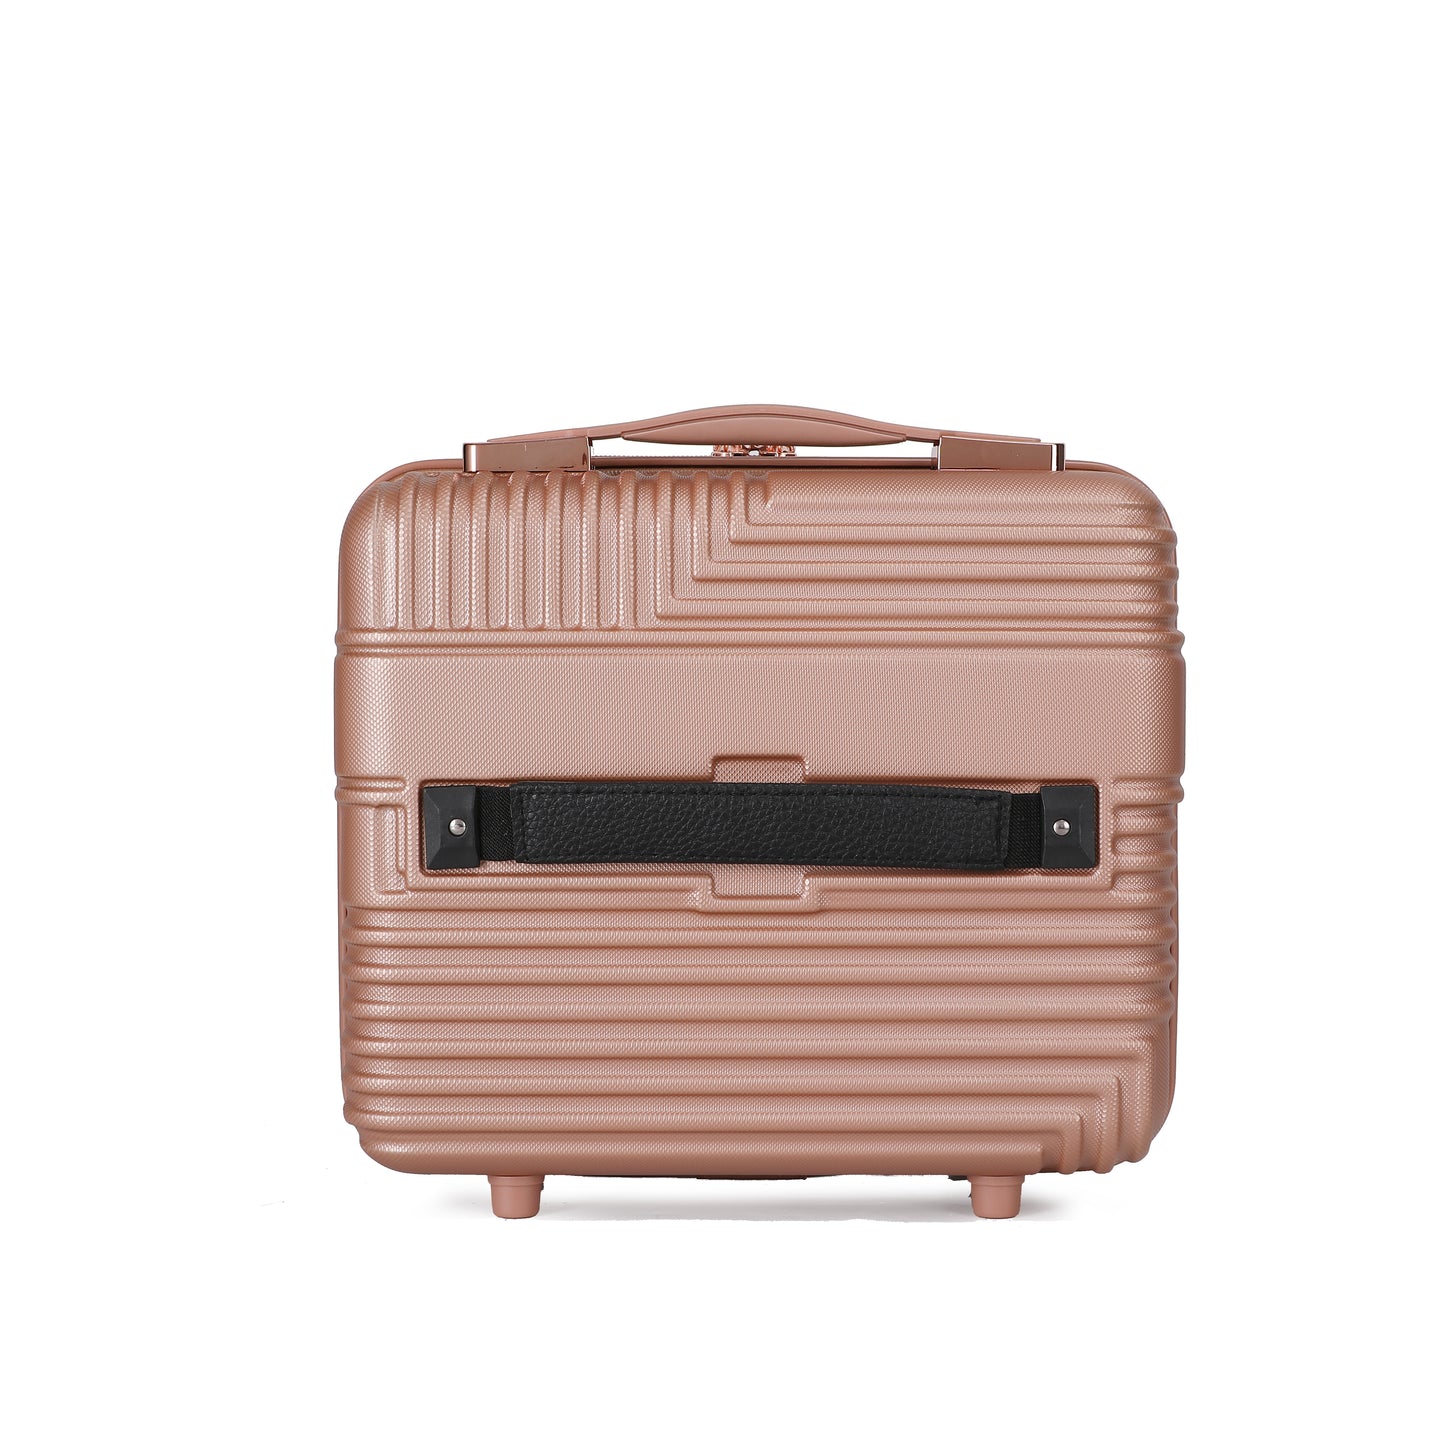 Mykonos Luggage Set with a Medium Carry-on and Small Cosmetic Case